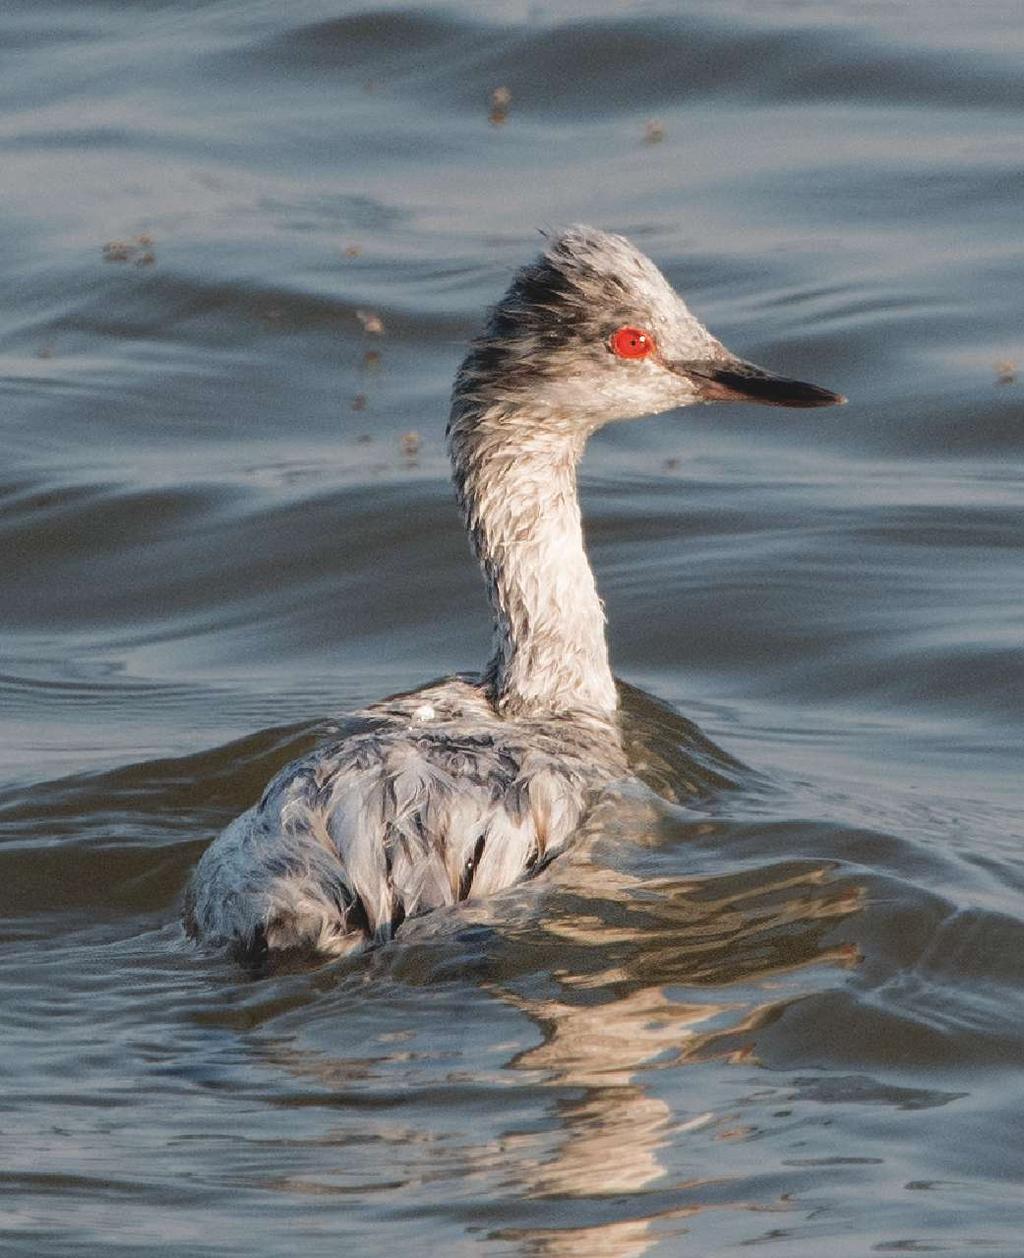 Why So Many White Eared Grebes? Possible interactions among leucism, molt, and pollutants Peter Pyle Bolinas, California ppyle@birdpop.org Mia McPherson Salt Lake City, Utah mm@onthewingphotography.